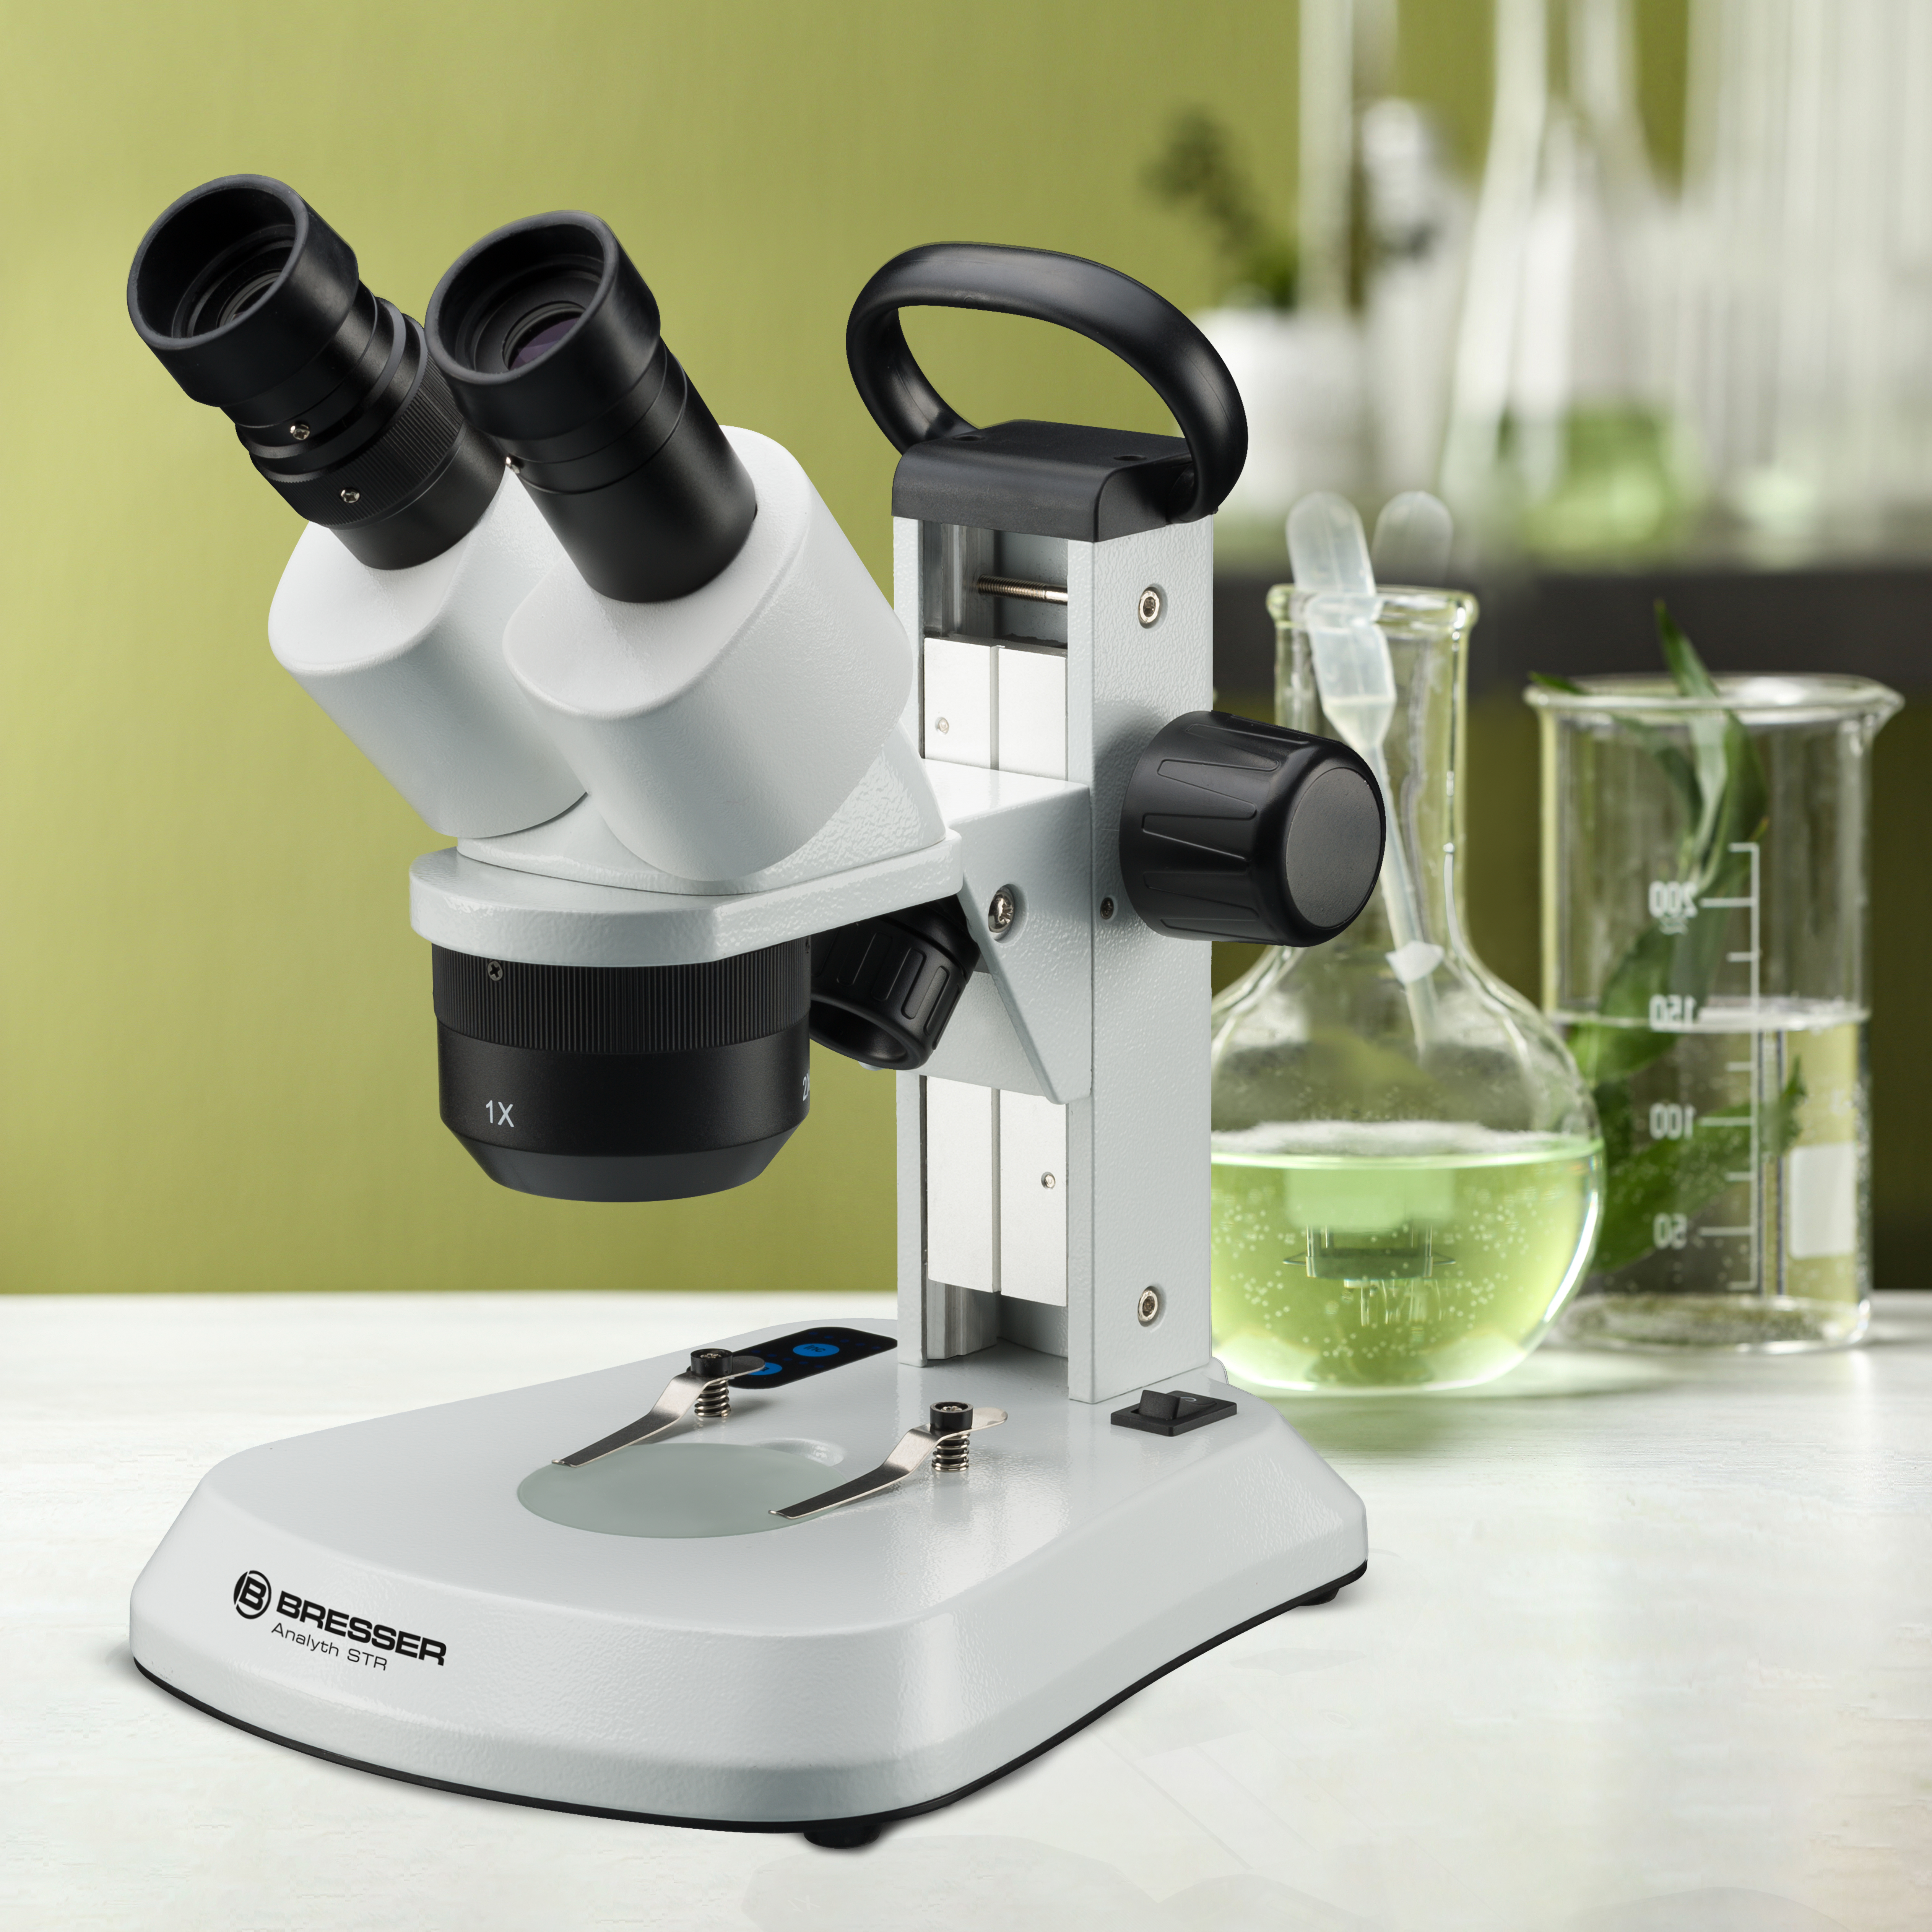 BRESSER Analyth STR 10x - 40x Stereo reflected and transmitted light microscope with MikrOkular Full HD eyepiece camera